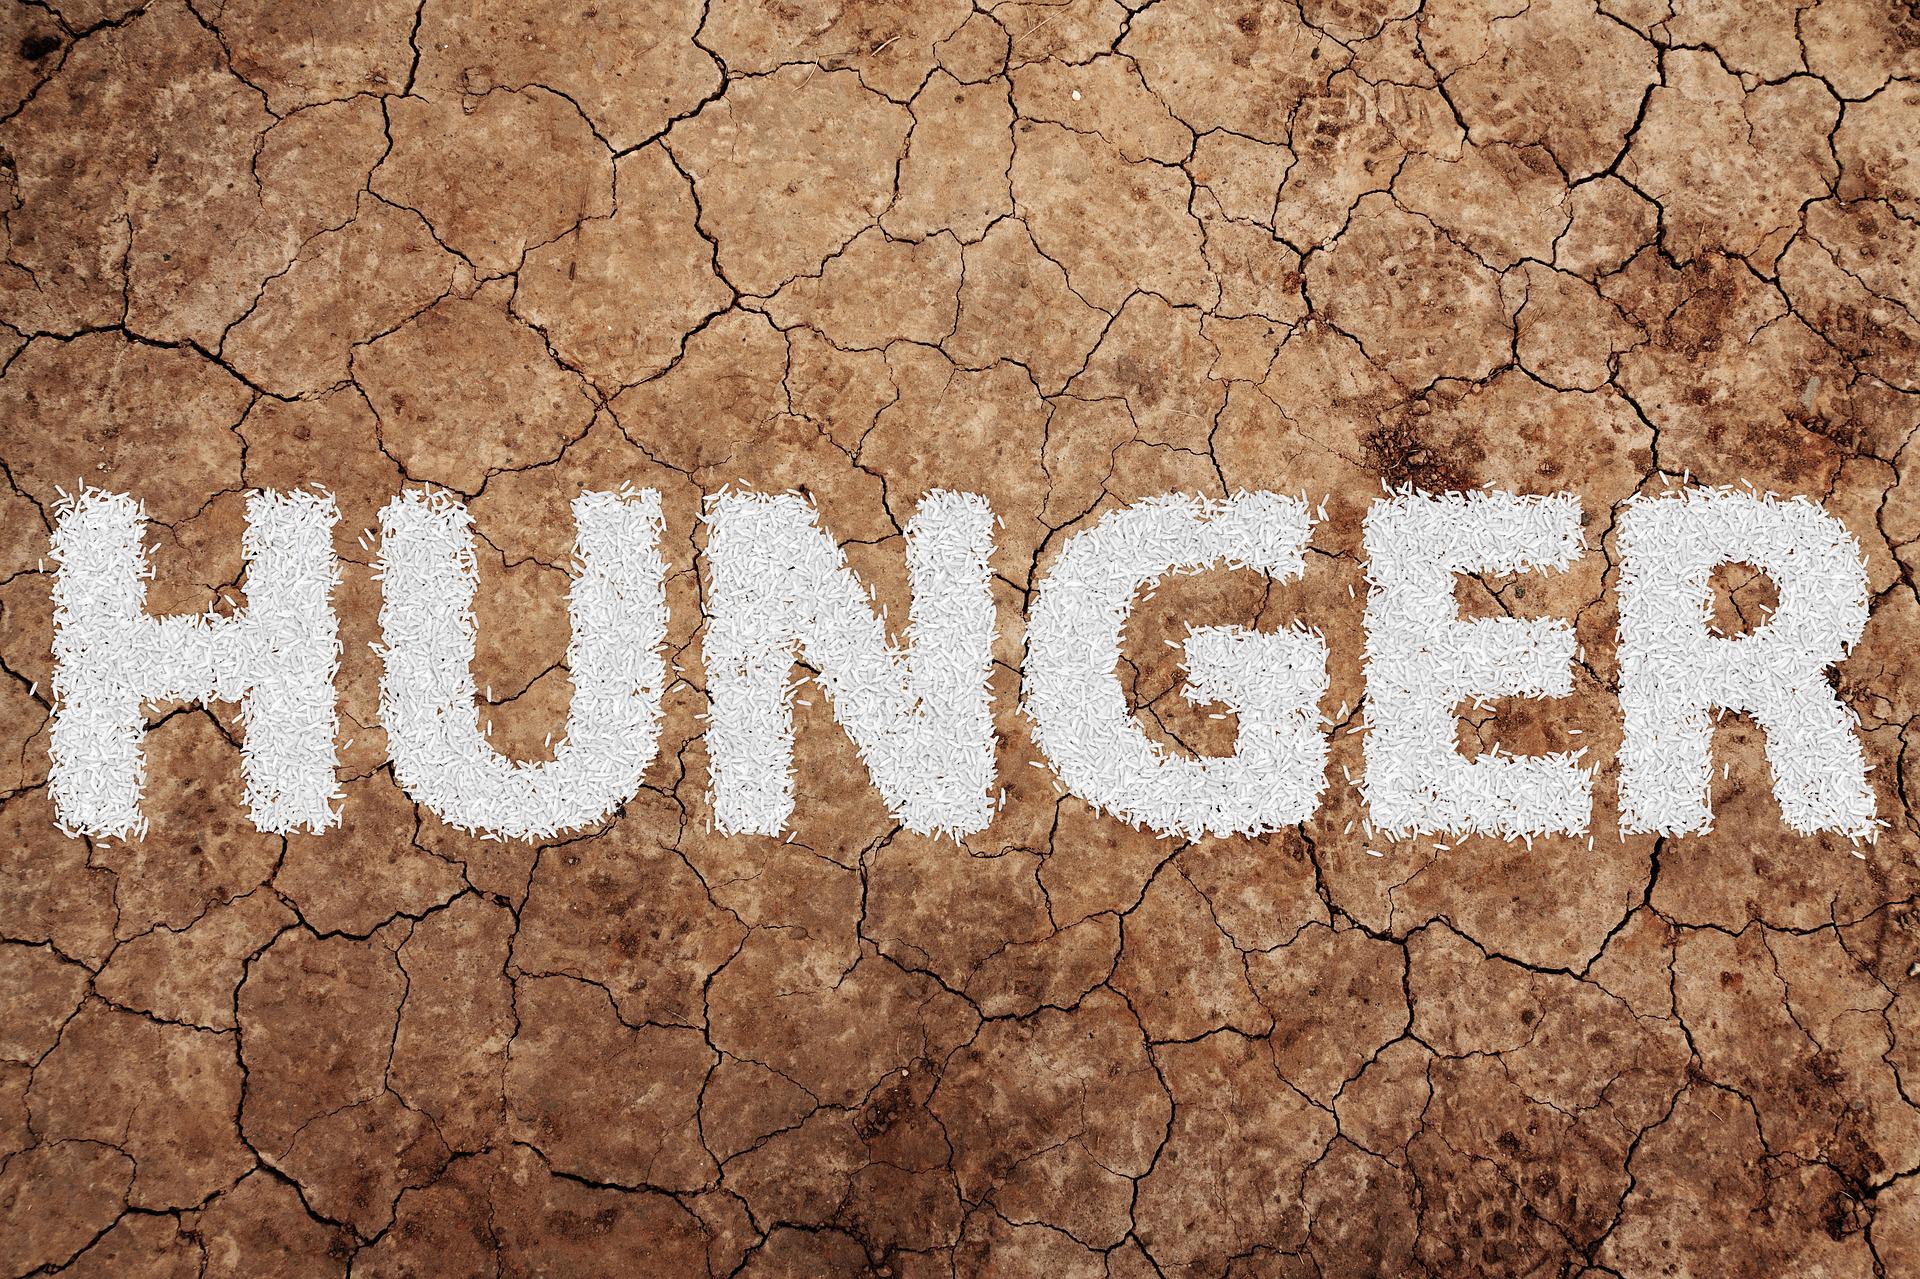 Why the World's Food Supply is in Danger and What You Can Do to Prepare